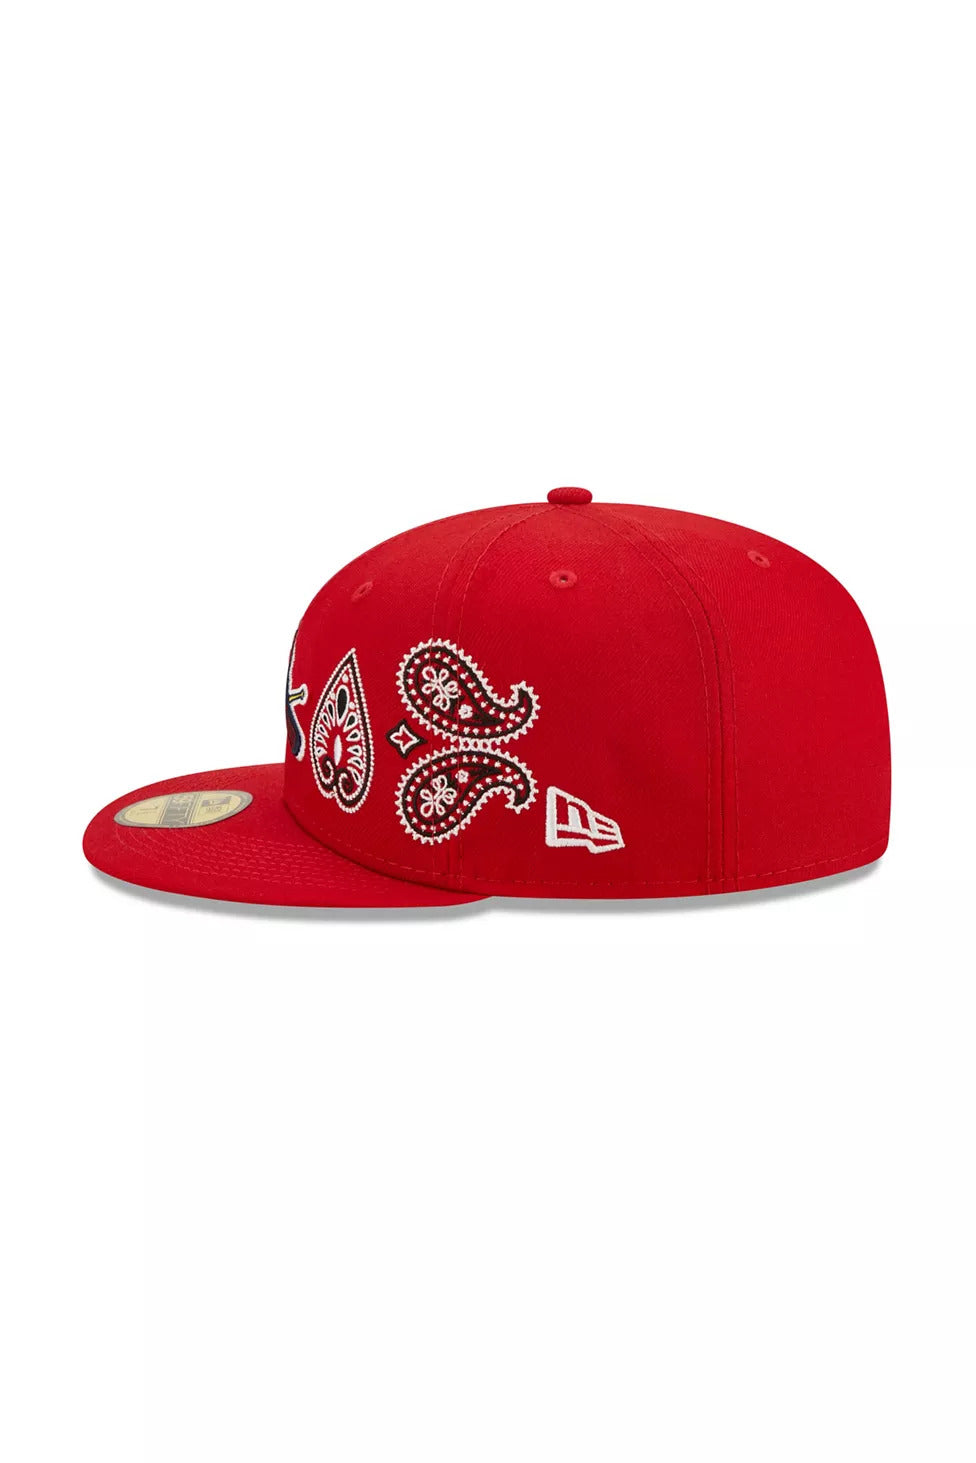 New Era 59FIFTY St. Louis Cardinals Paisley Fitted Hat in Red, Men's at Urban Outfitters